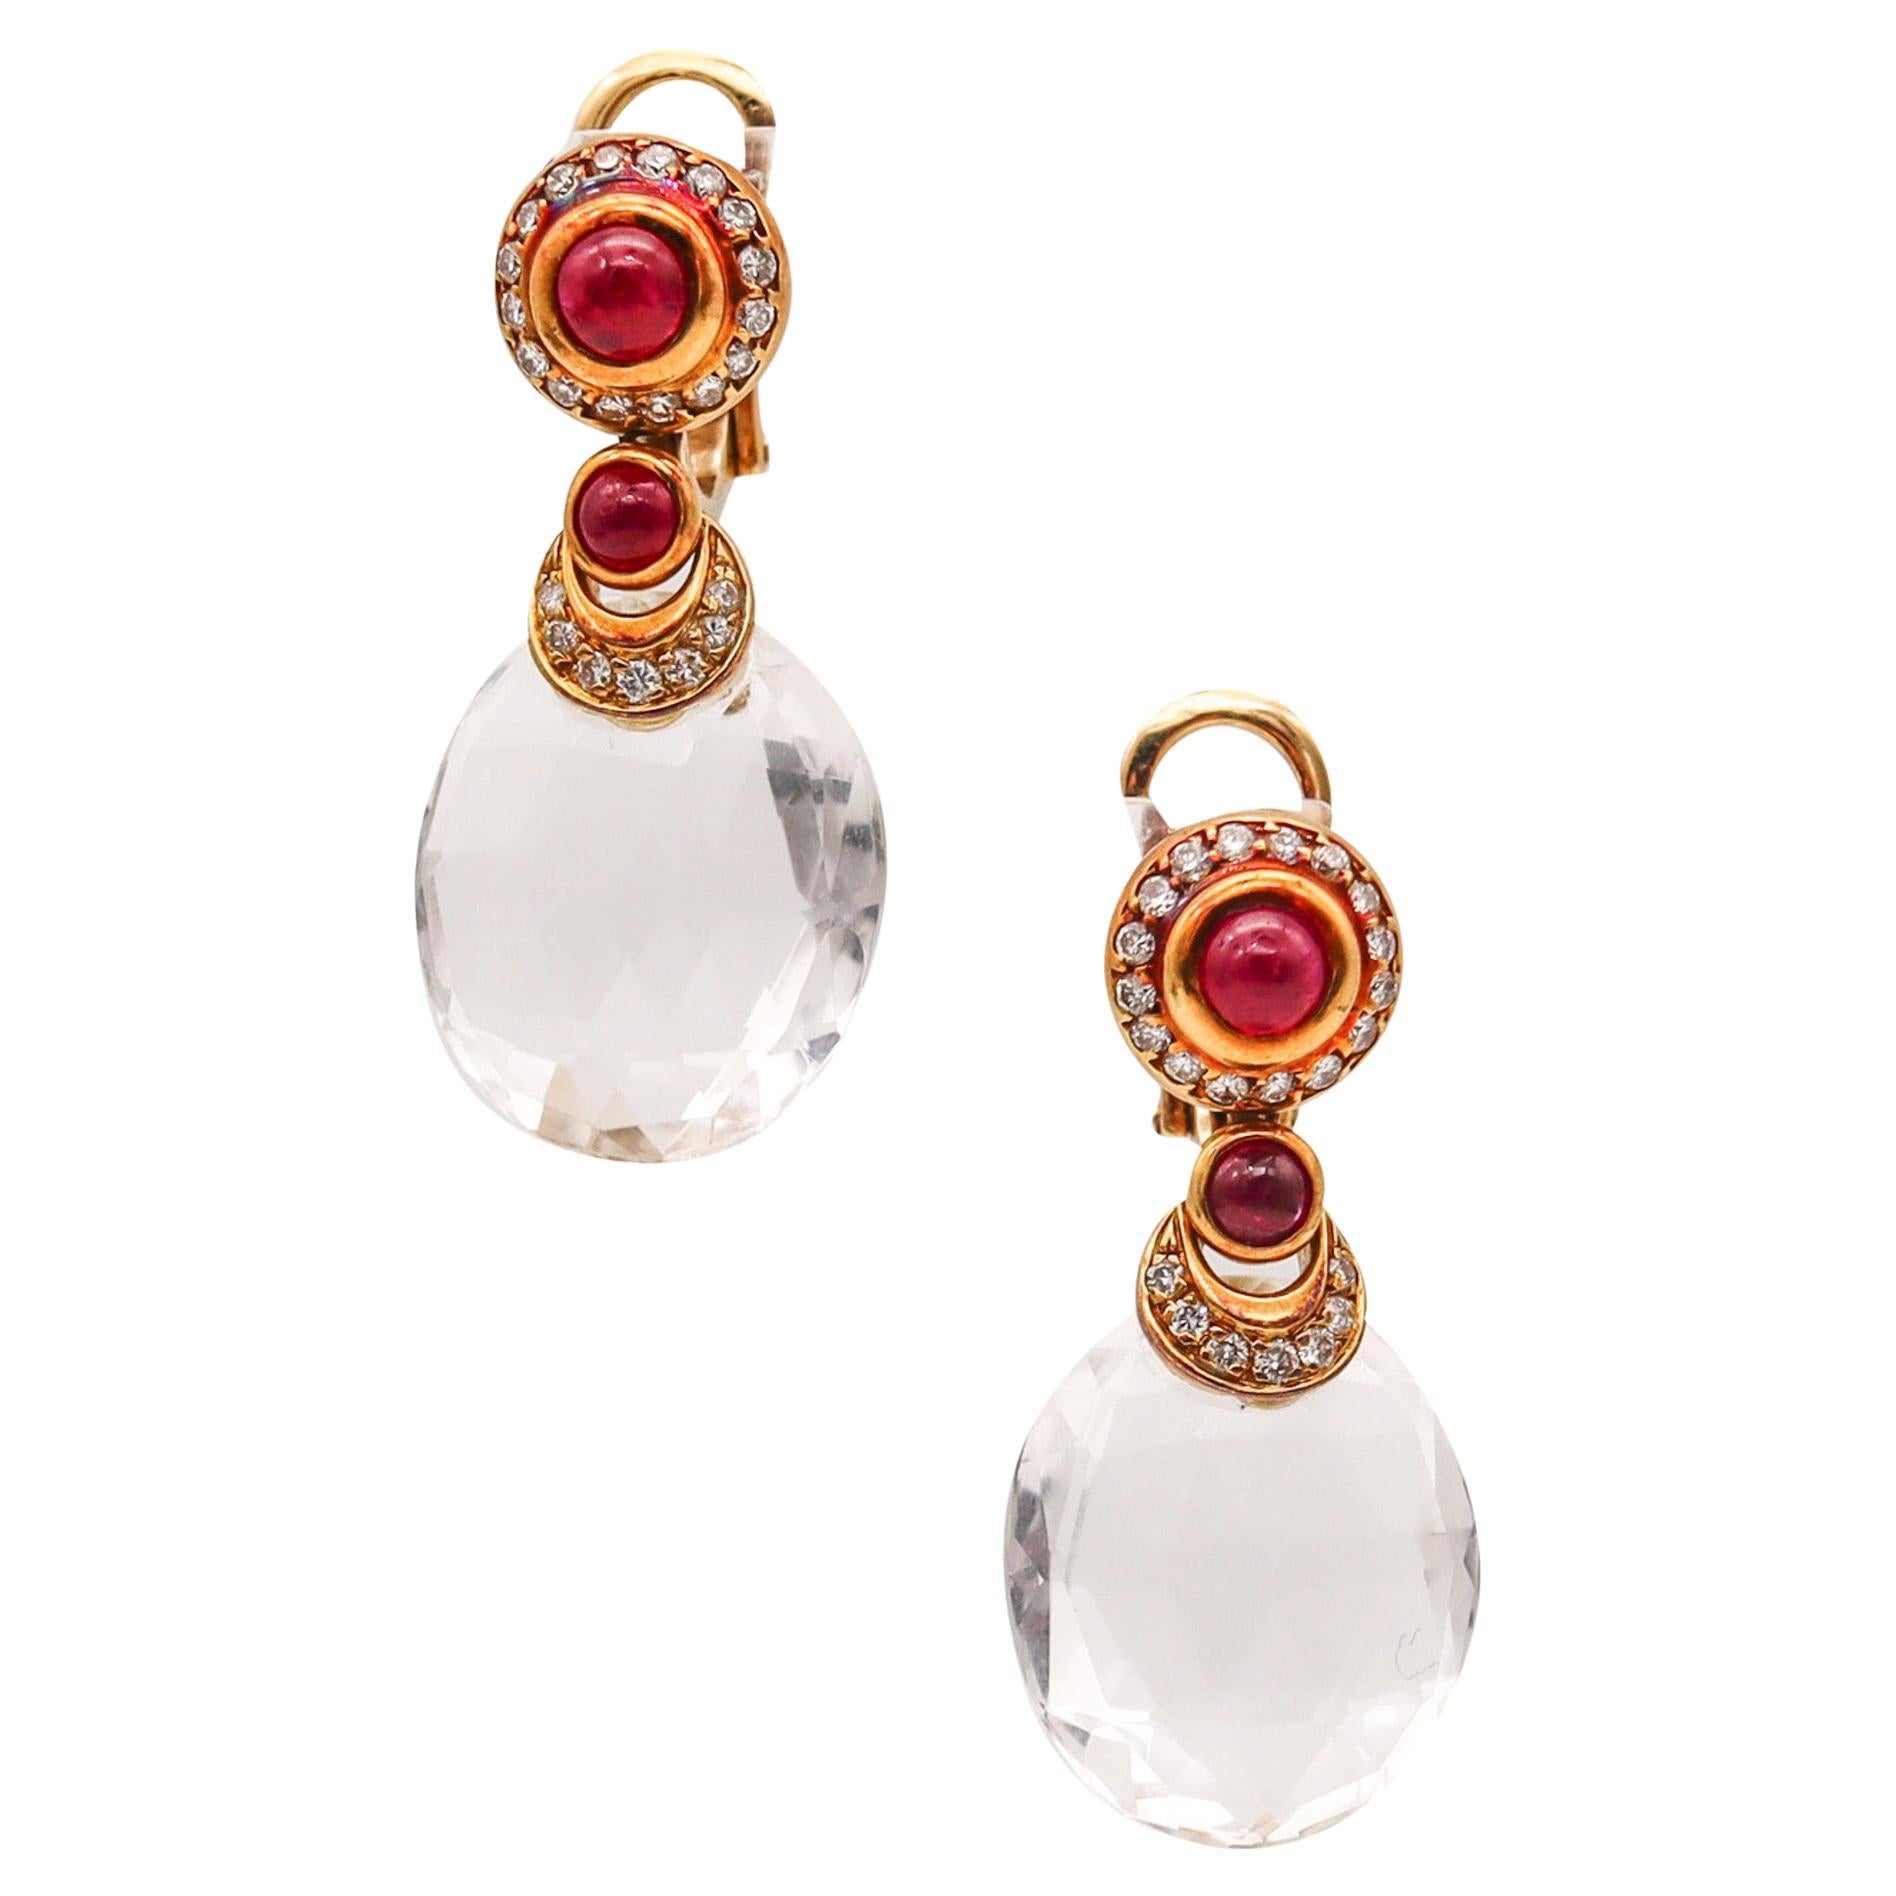 Faraone Mennella Dangle Earrings In 18Kt Gold With 21.82 Ctw Diamonds And Rubies